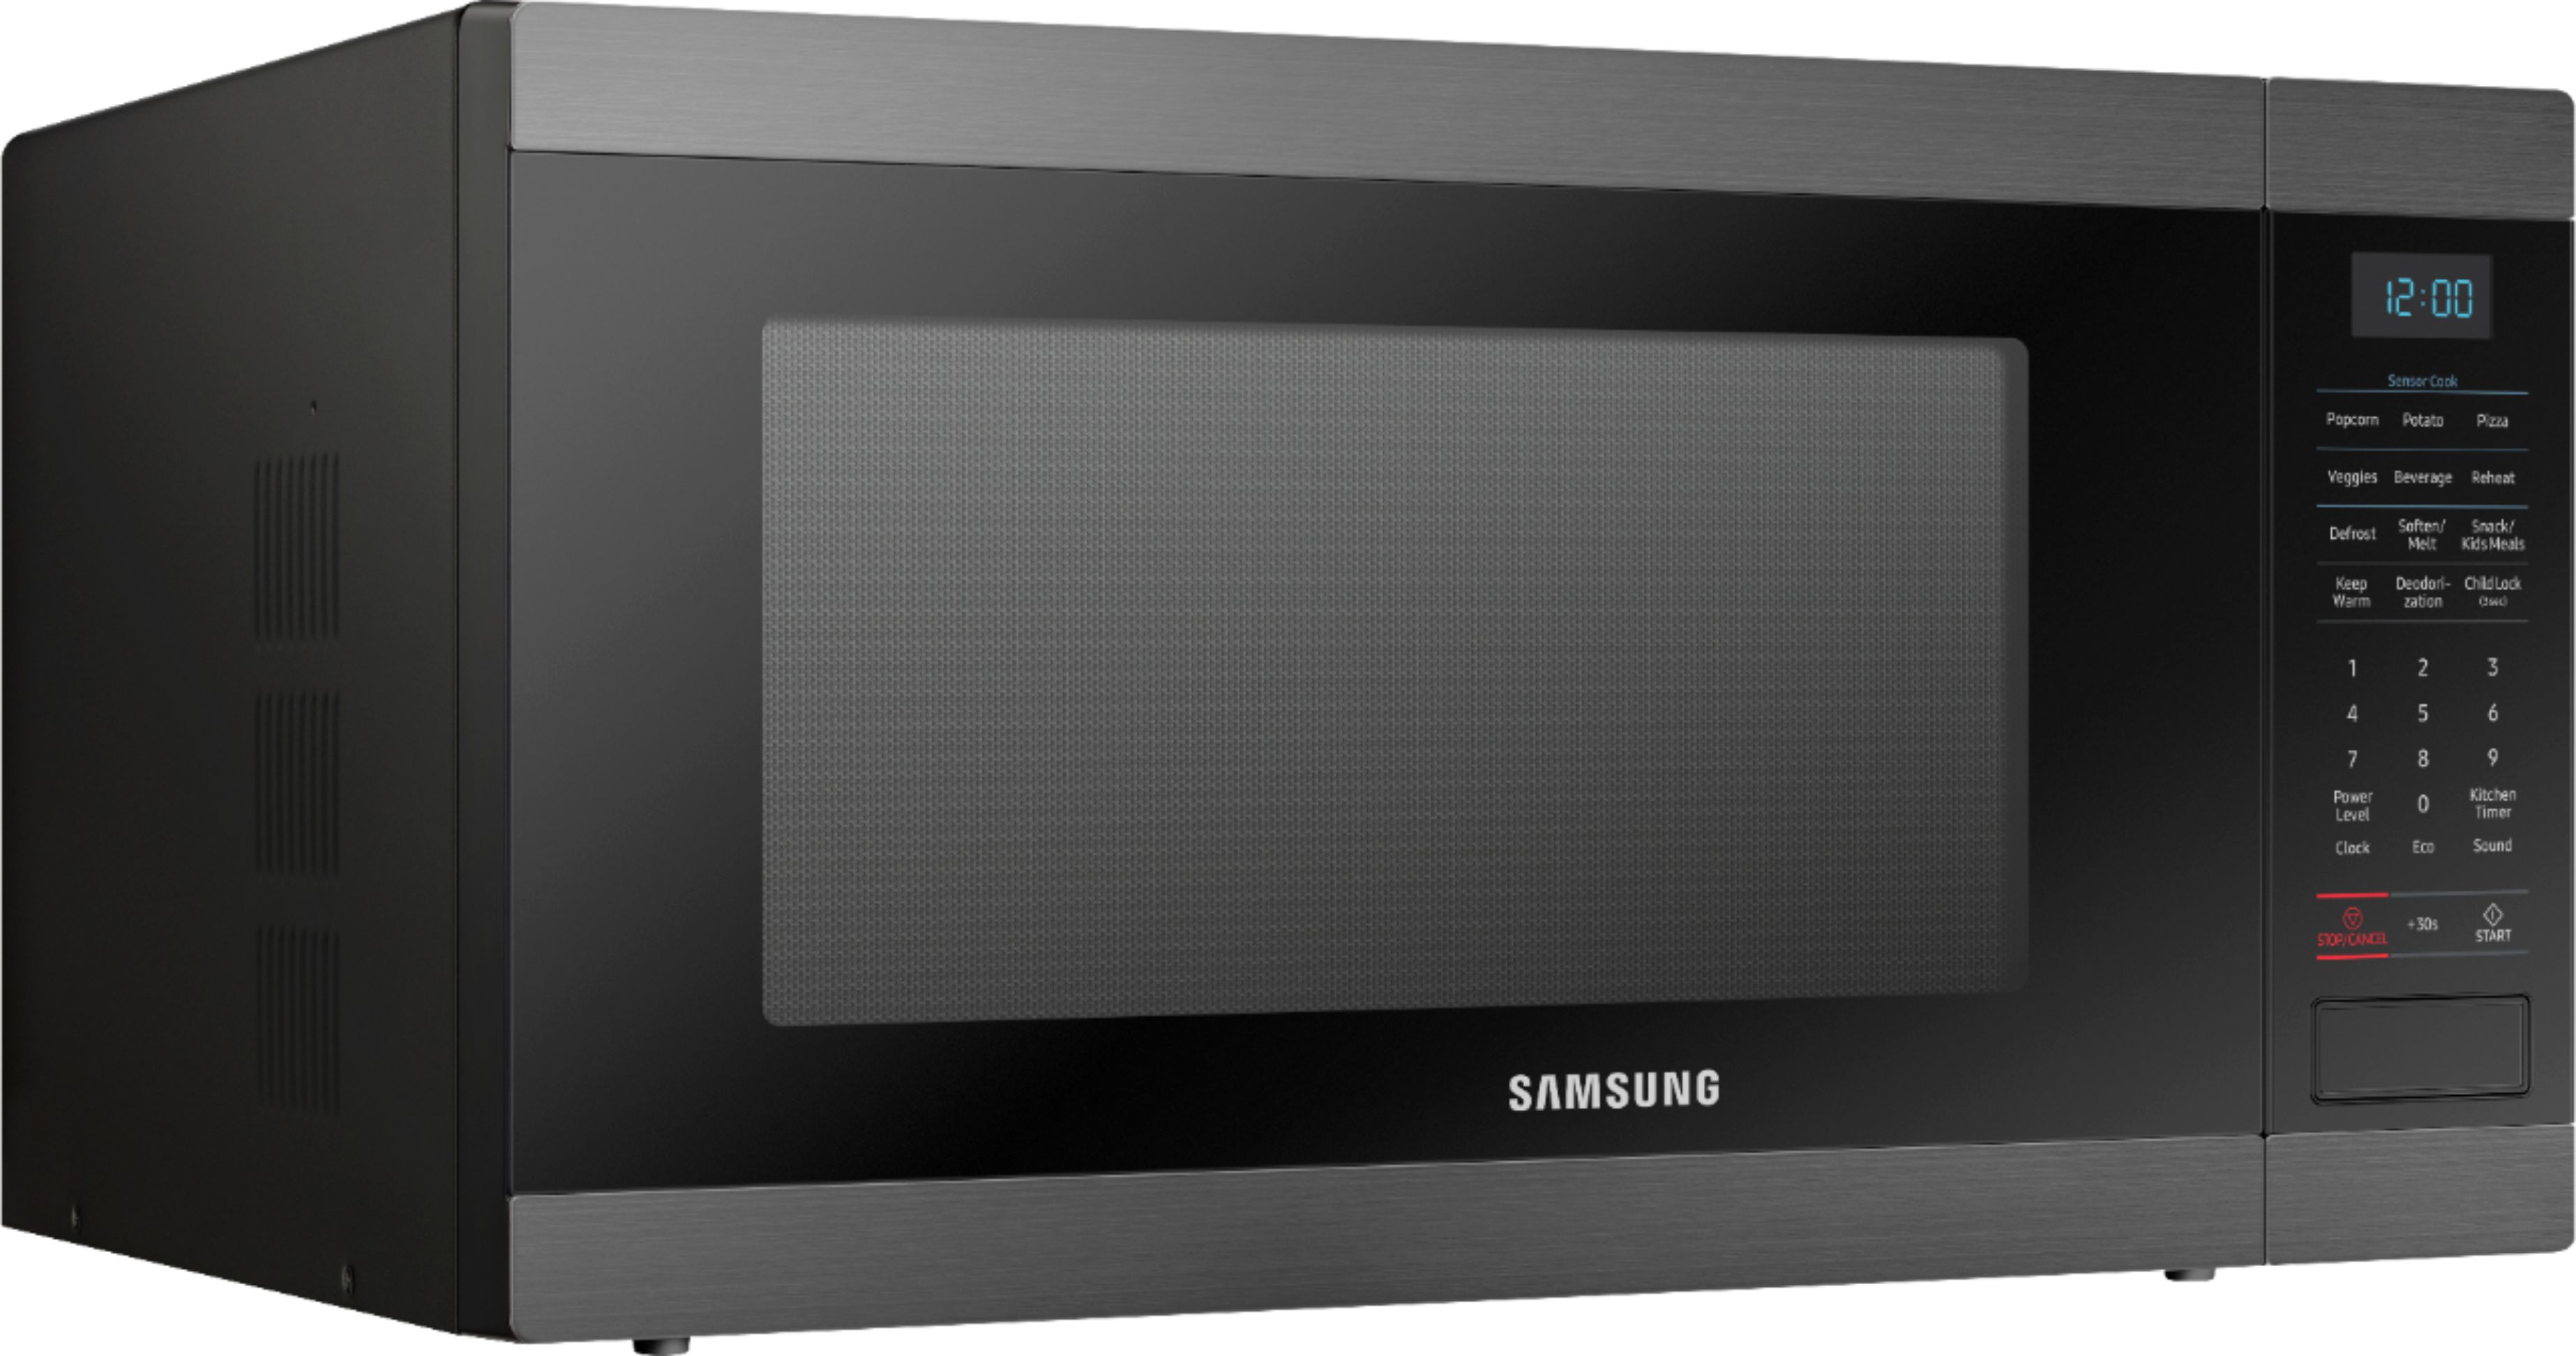 Angle View: Samsung - 1.9 Cu. Ft. Countertop Microwave for Built-In Applications with Sensor Cook - Black stainless steel